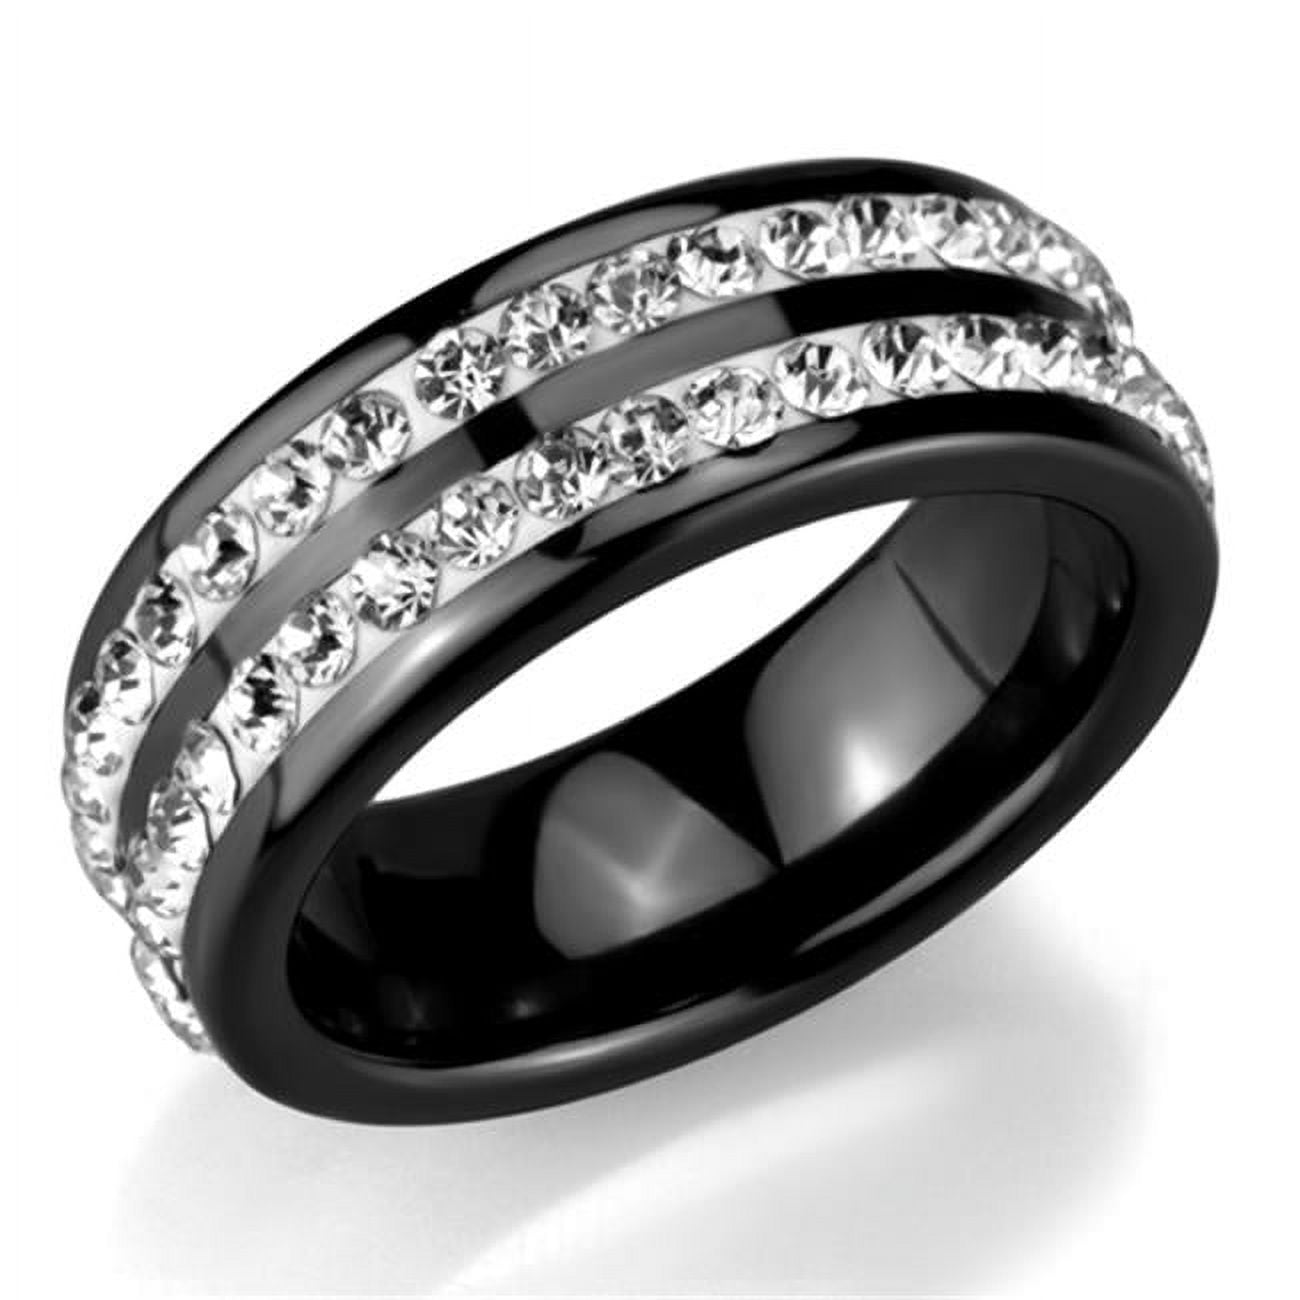 Picture of Alamode 3W971-7 Women High Polished Stainless Steel Ring with Ceramic in Jet - Size 7